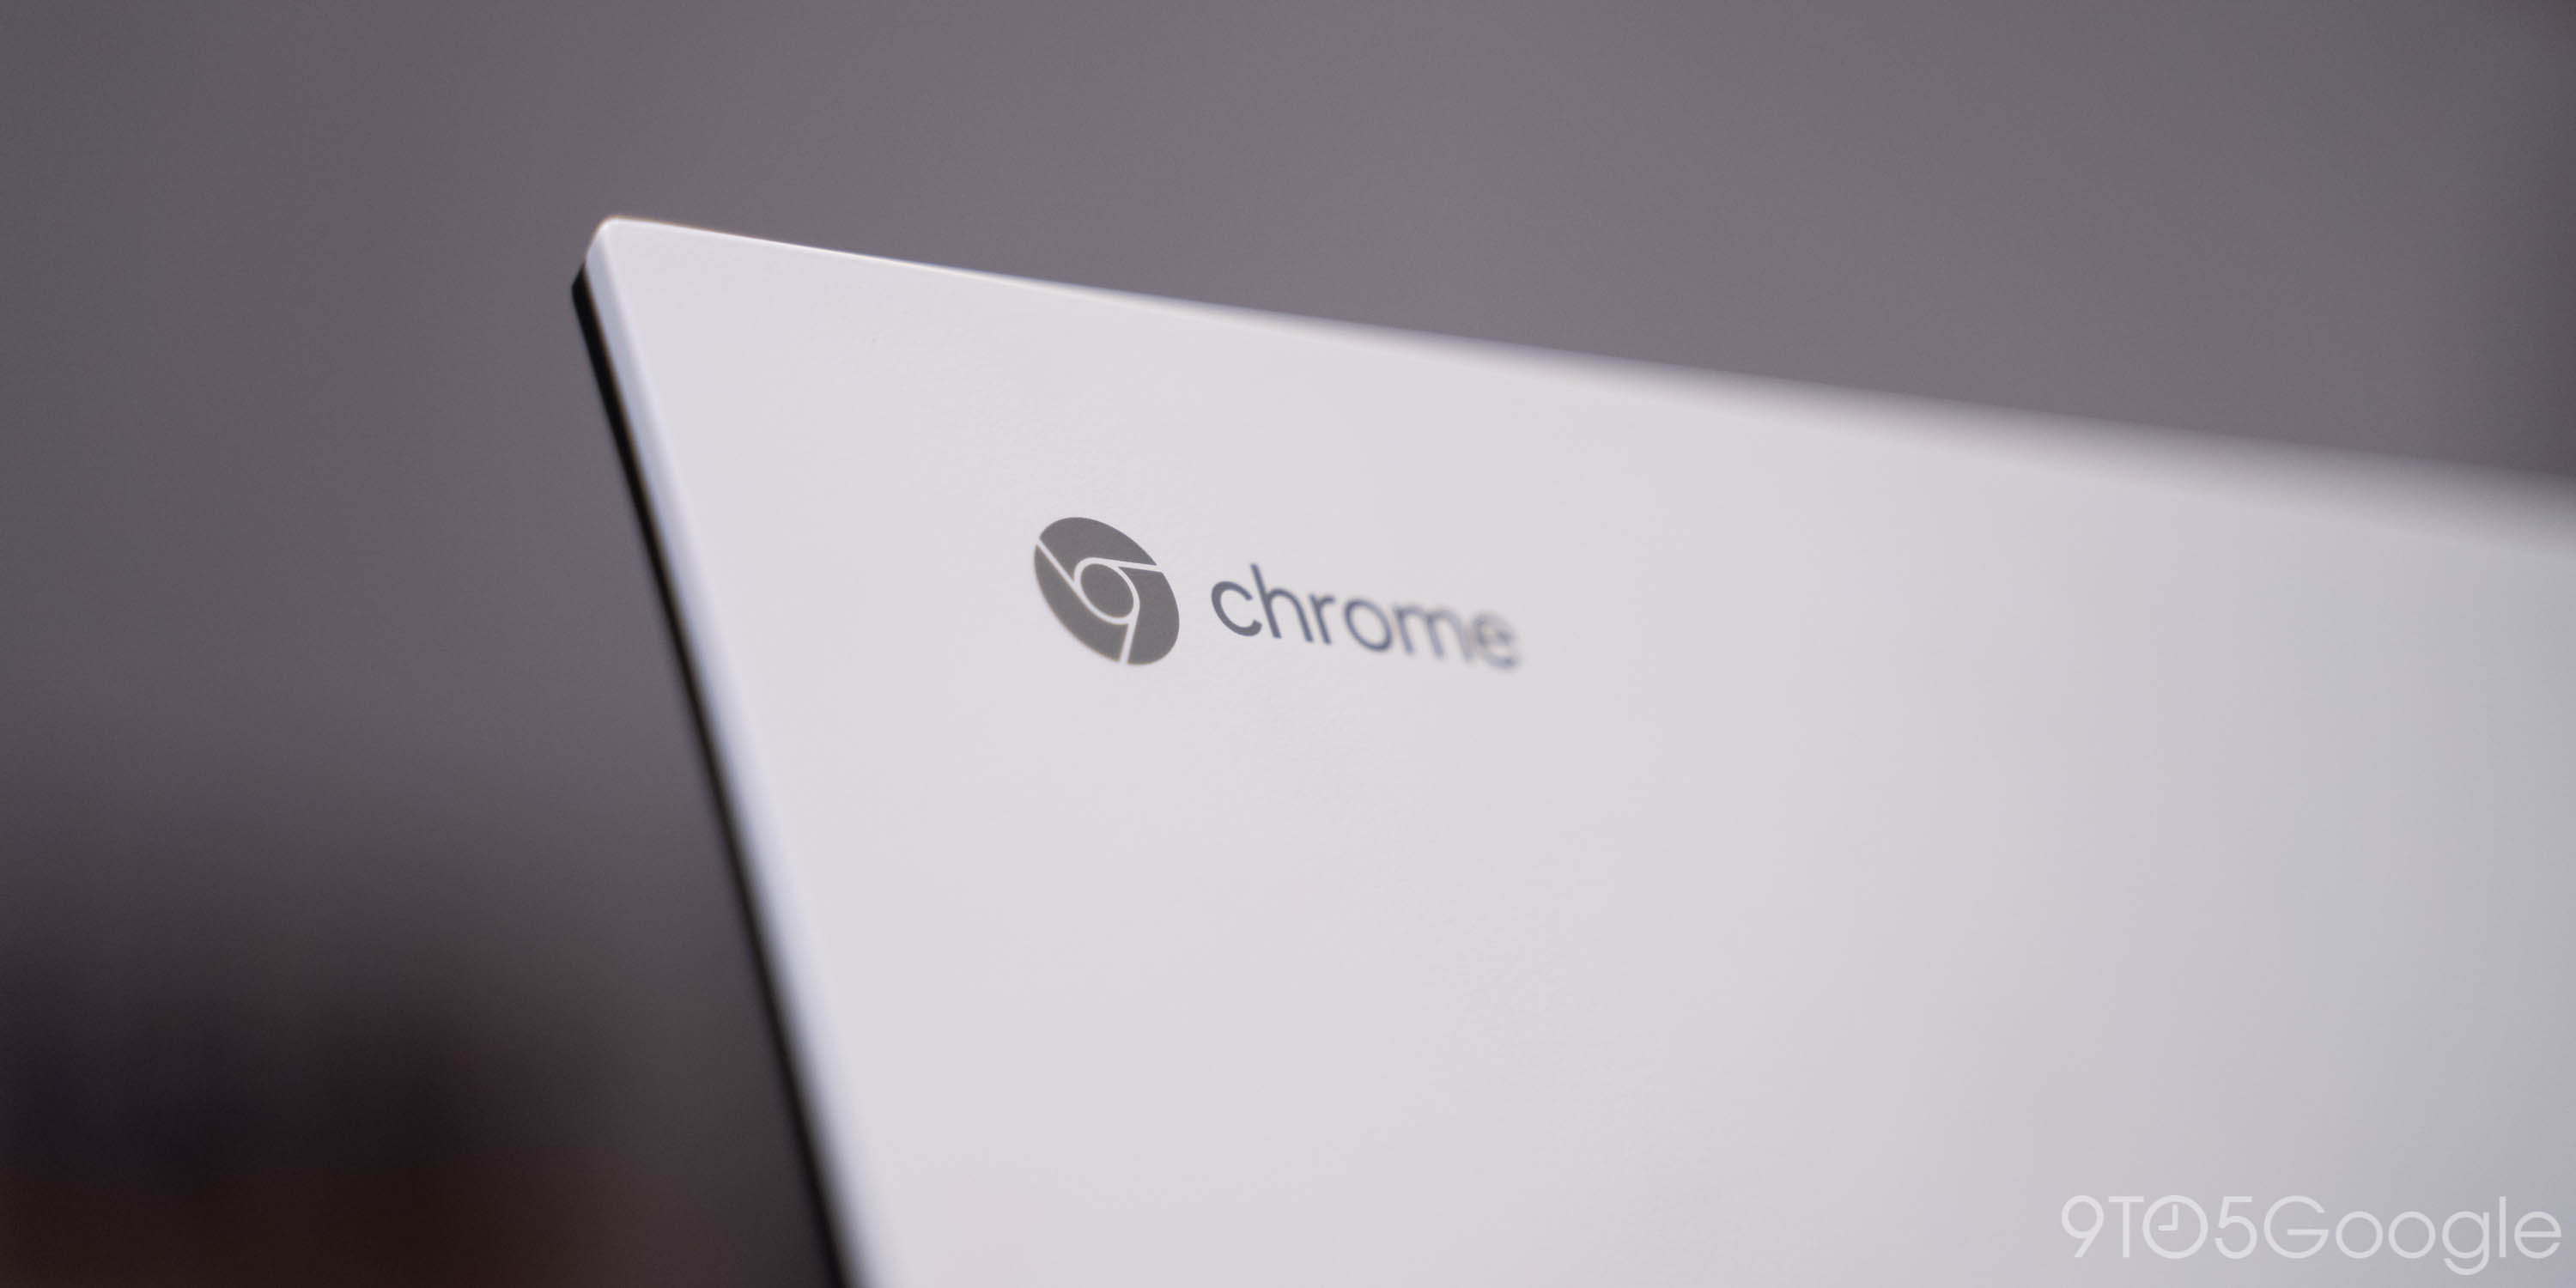 Chrome OS 87 rolling out: Tab Search, Bluetooth battery - 9to5Google